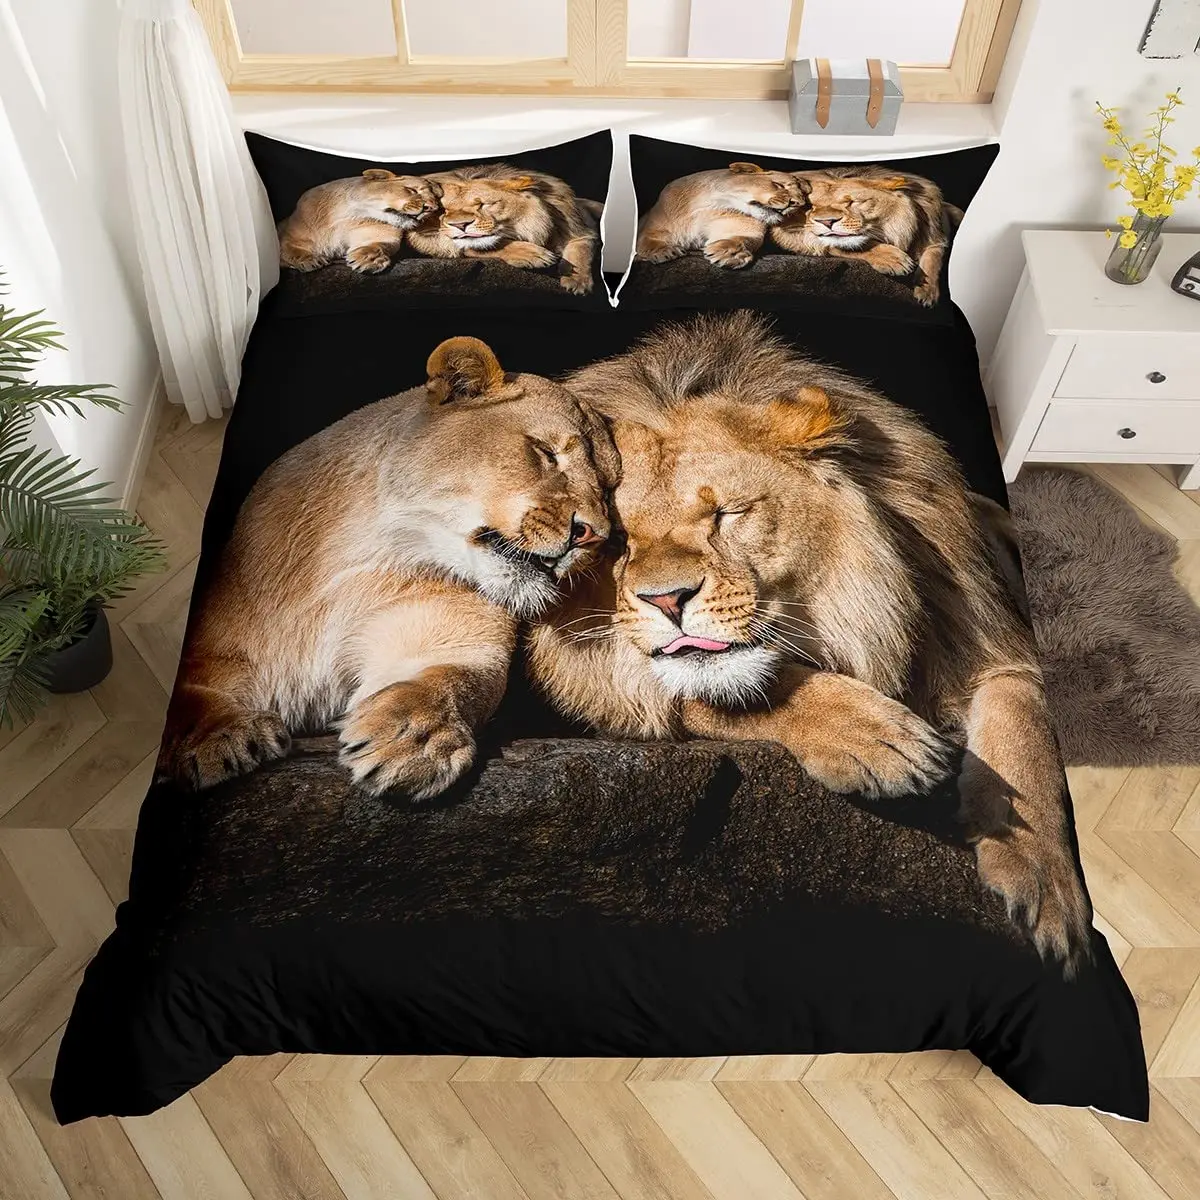 

Lion Animals Duvet Cover Lightning Lion Pattern Jungle Wildlife Grey Black Bed Cover for Teens Boys Young Man Decoration Room